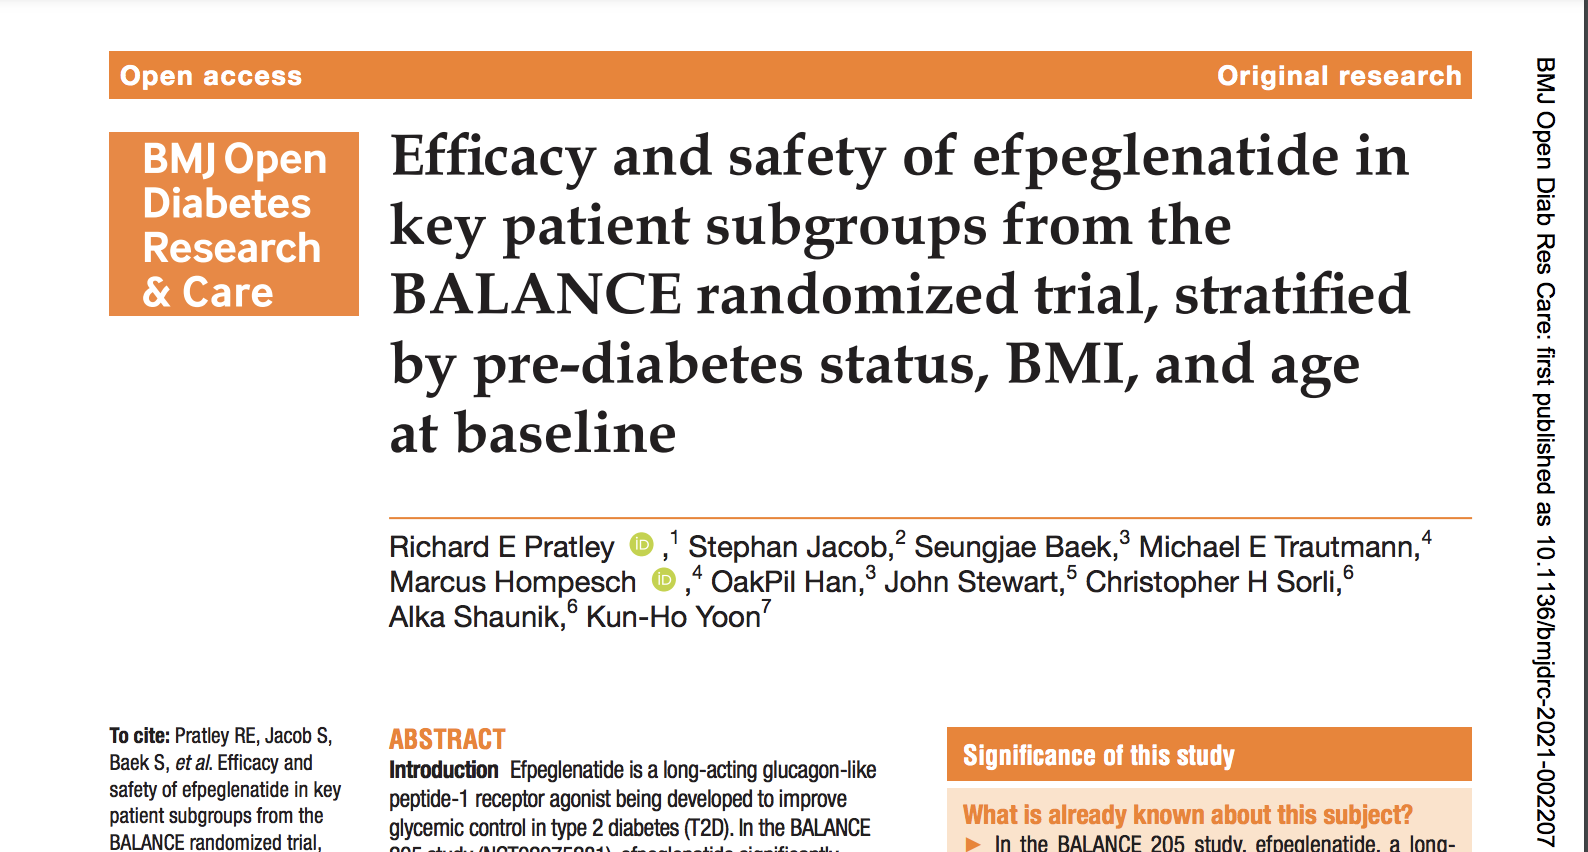 image of Efficacy and safety of efpeglenatide in key patient subgroups from the BALANCE randomized trial, stratified by pre-diabetes status, BMI, and age at baseline